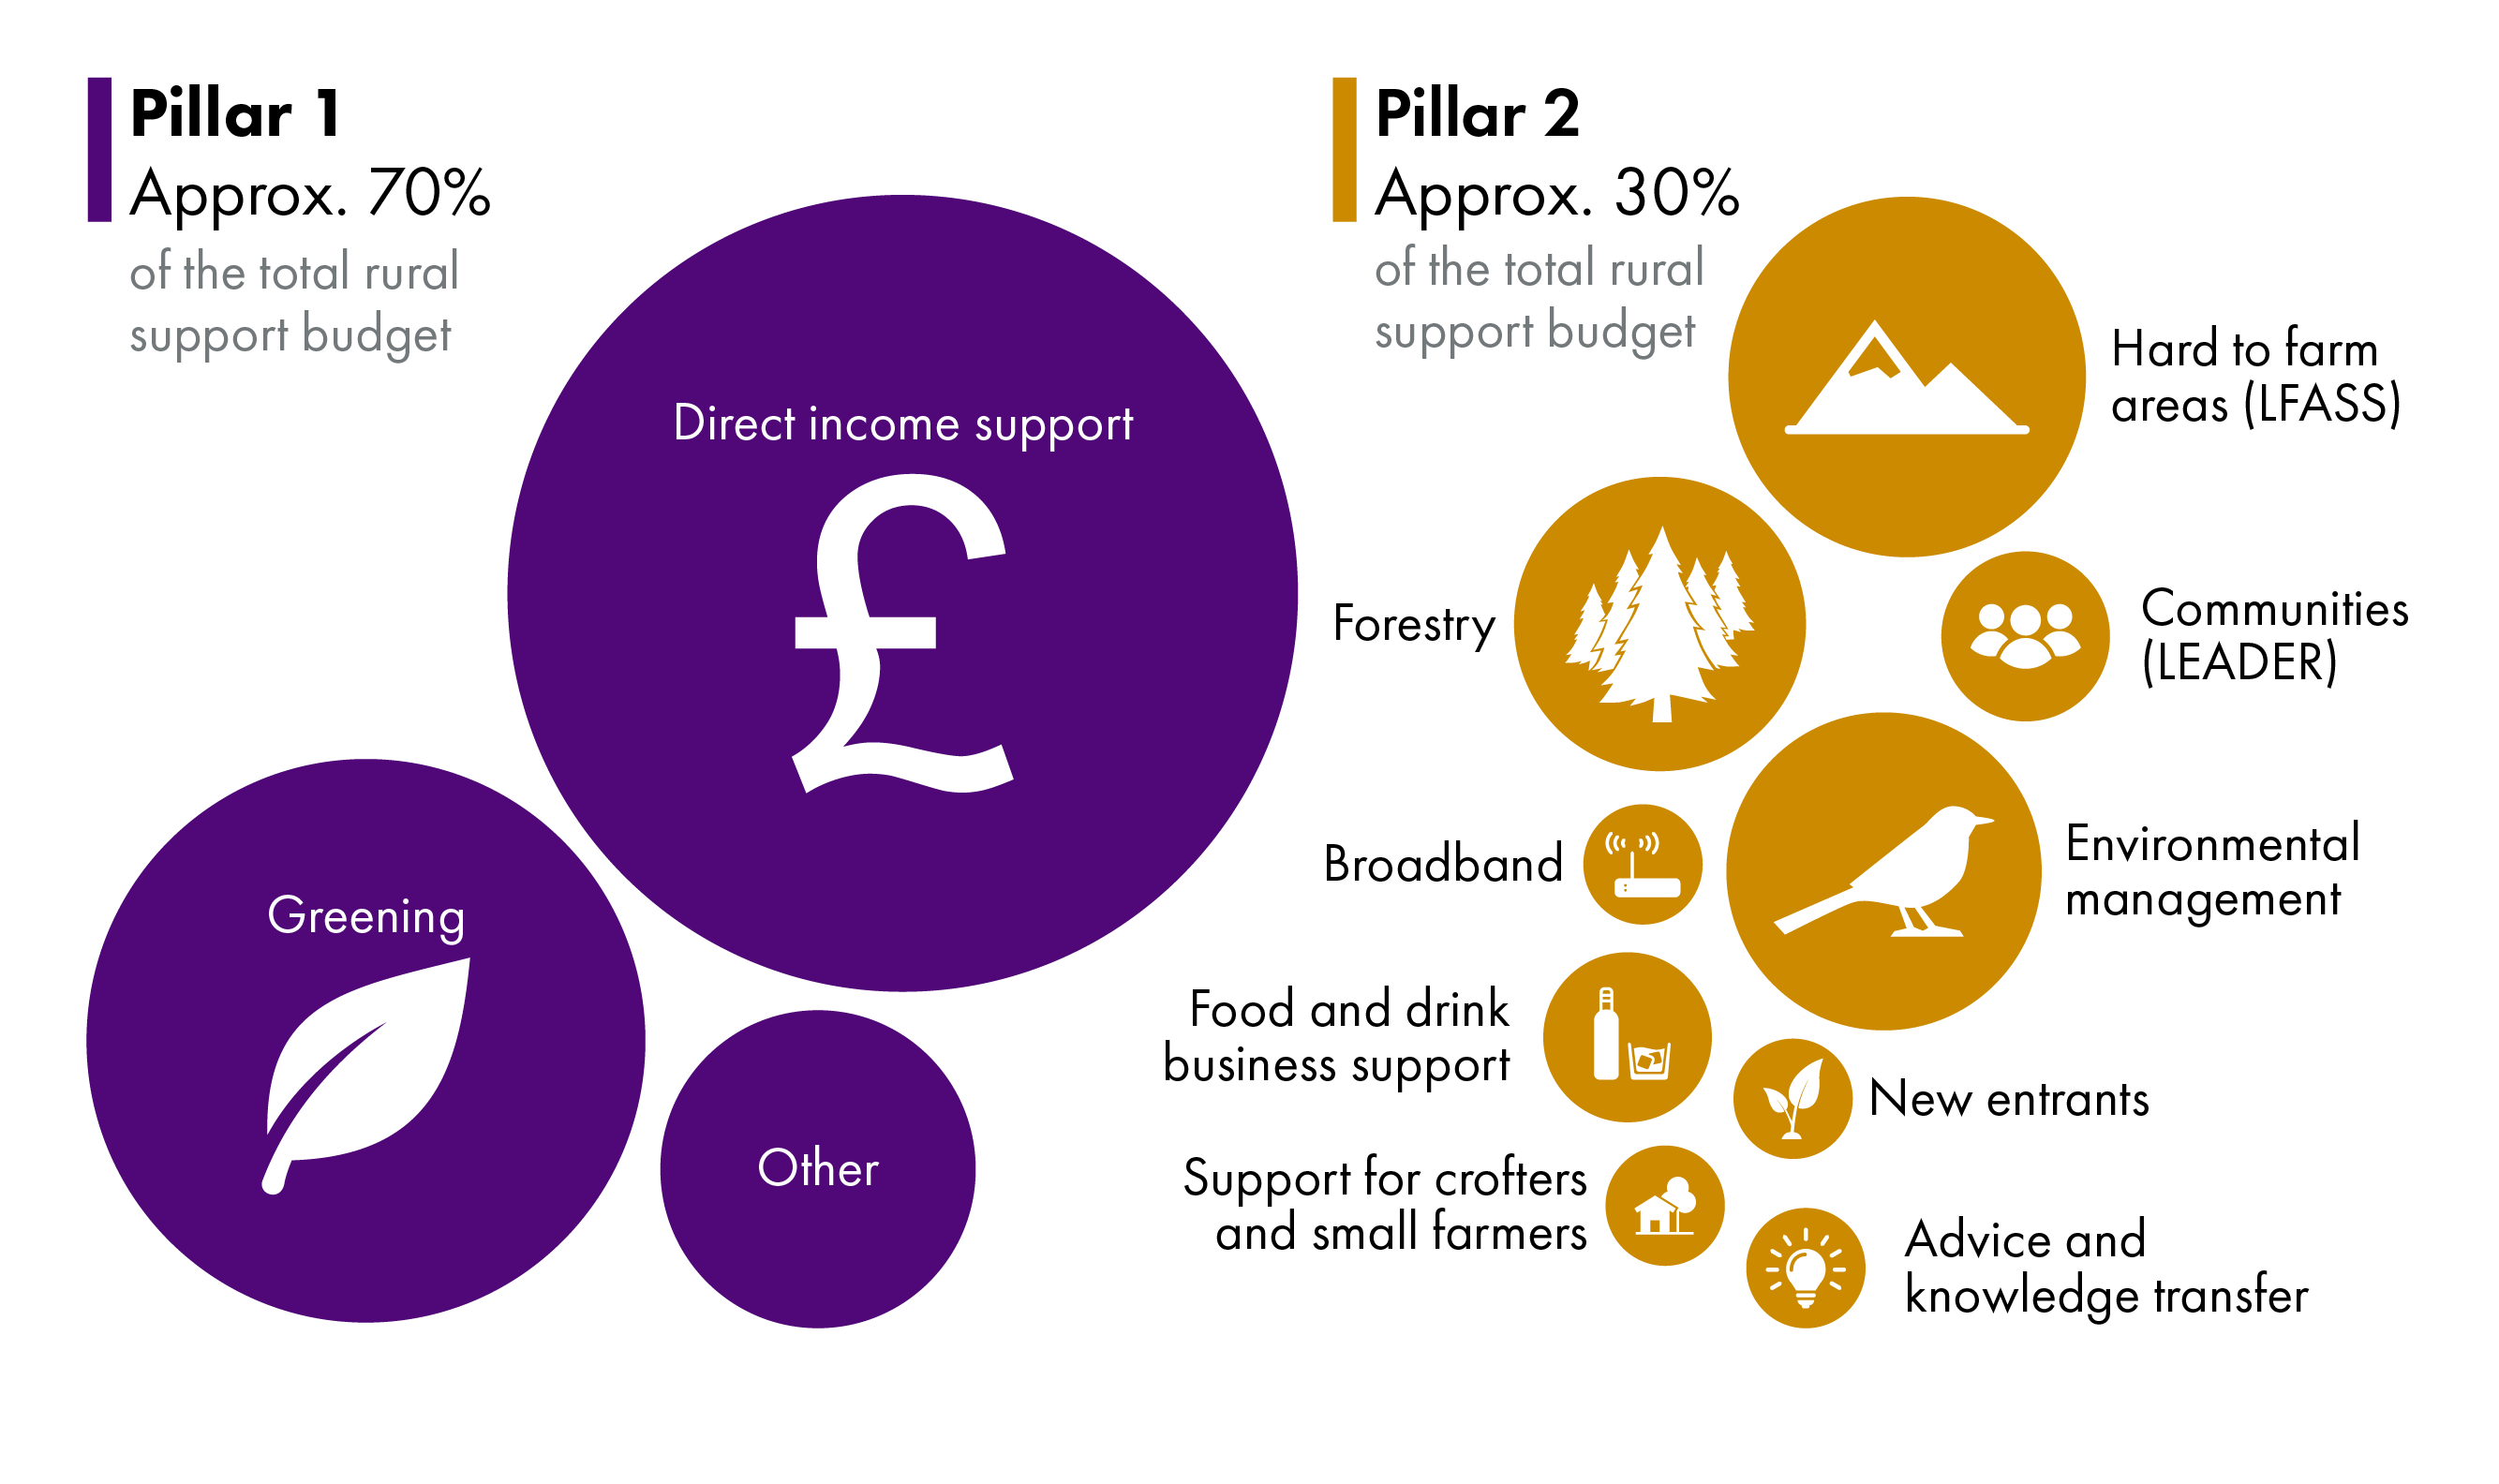 There are several different schemes under the Common Agricultural Policy in Scotland. In Pillar 1, the majority of funding goes to income support, and secondly to greening. In Pillar 2, the largest areas of support are for hard to farm areas, forestry, and environmental management, followed by smaller budgets like food and drink business support and community projects.